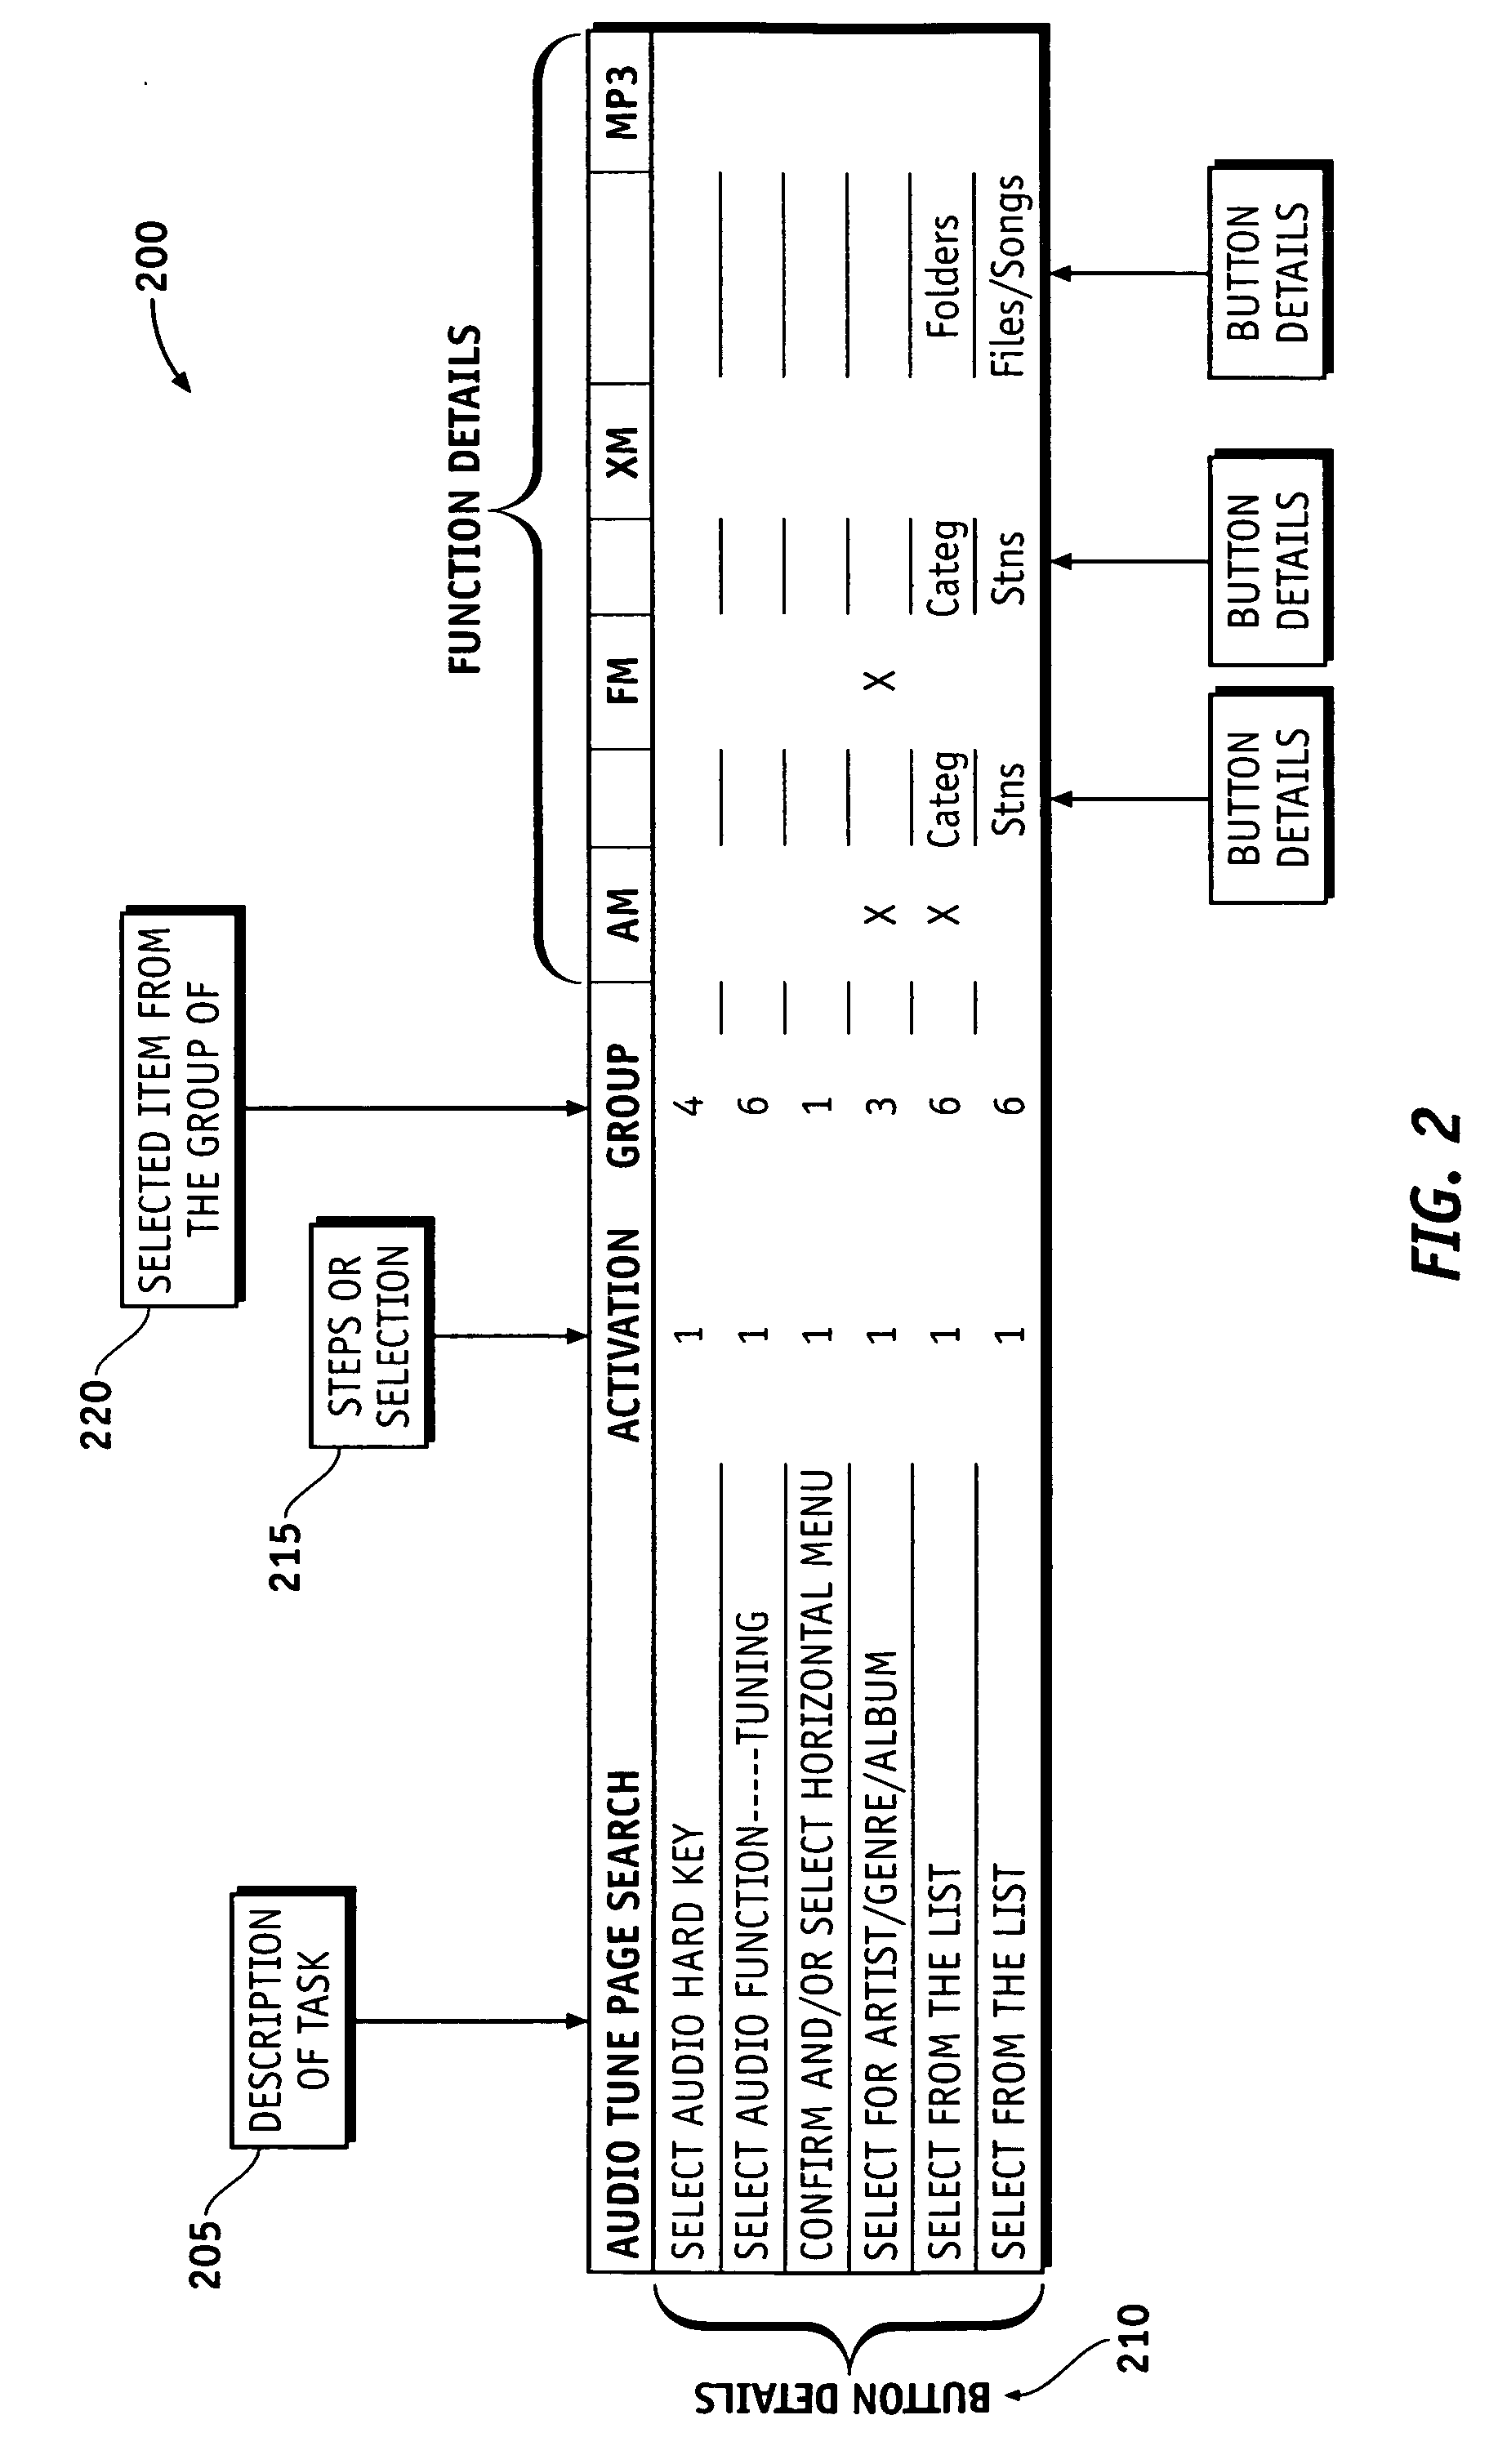 Method for real-time assessment of driver workload by a navigation or telematics device